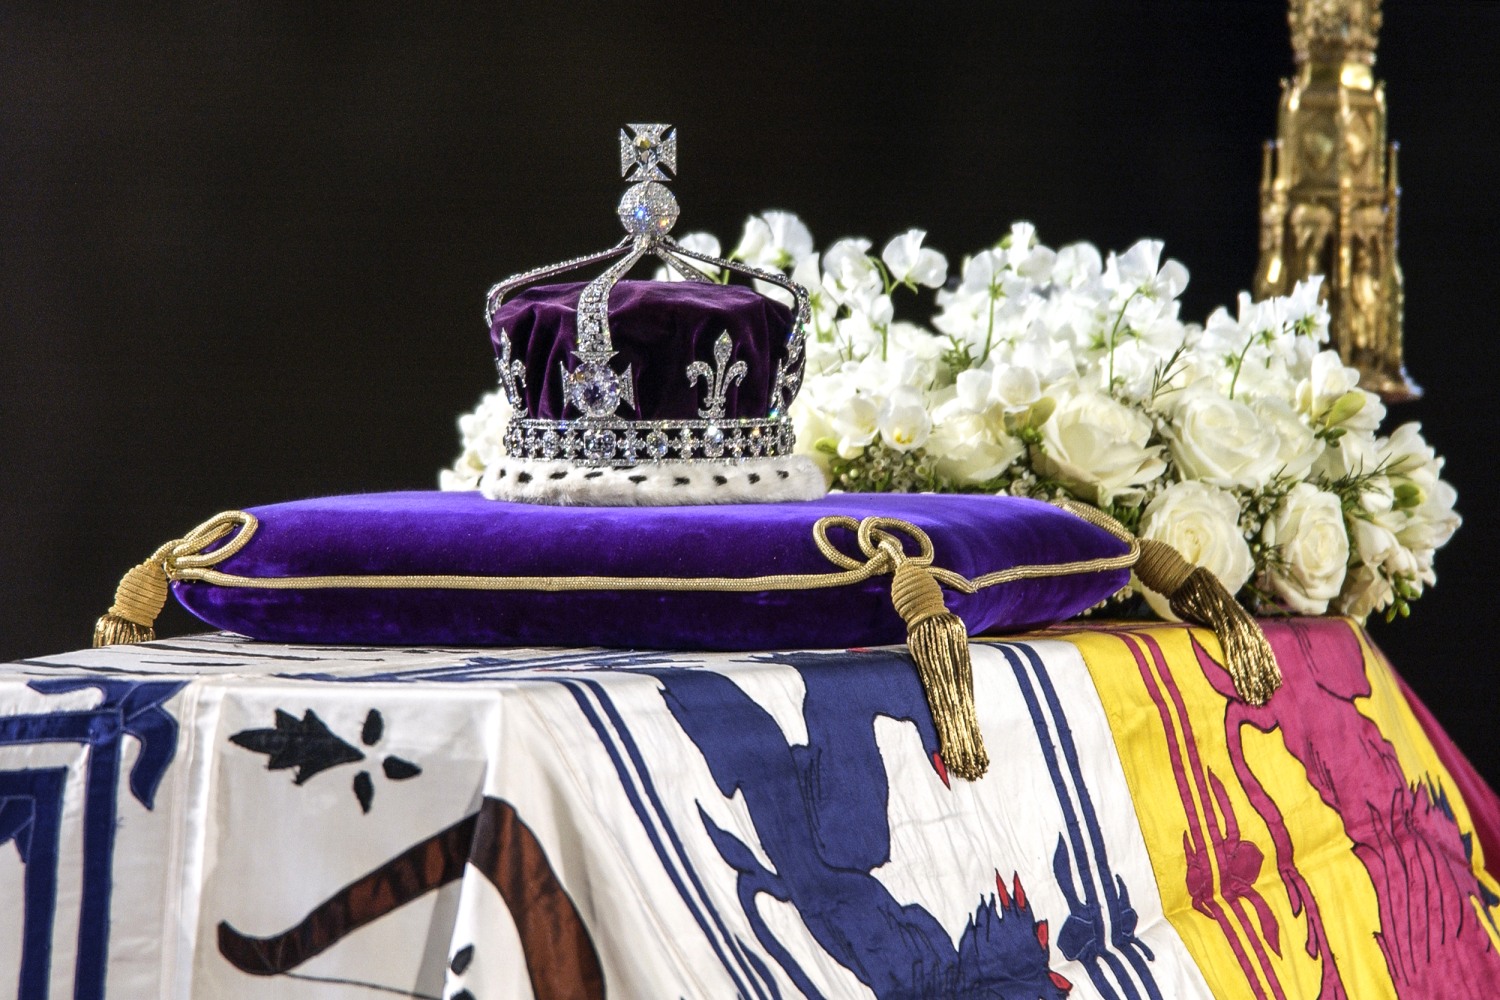 The Kohinoor diamond was obtained by the British Empire. Some argue it  should be returned to India.